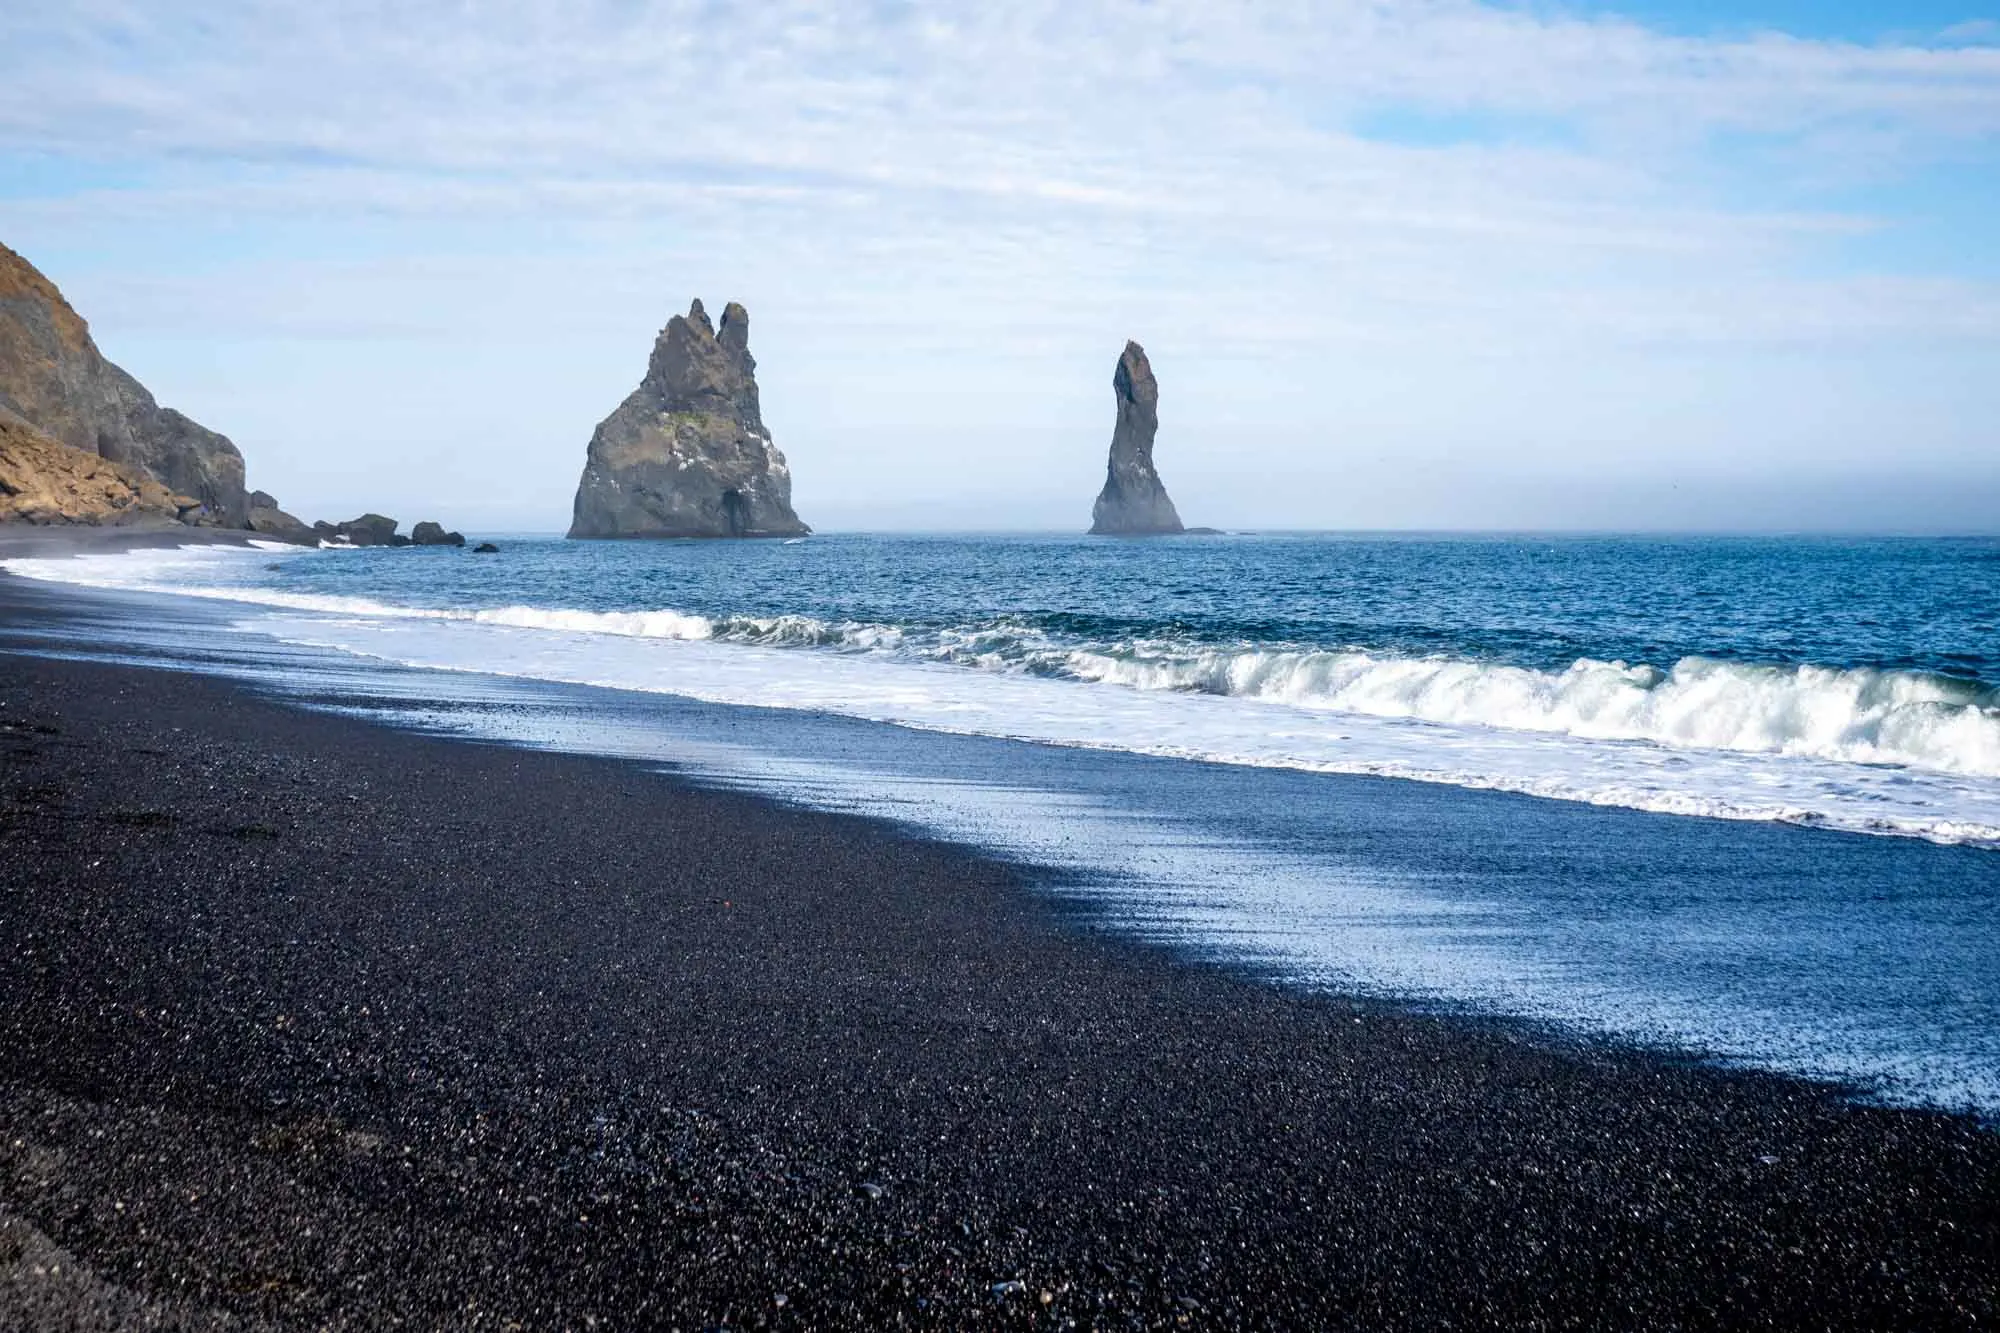 Rock formations in the ocean right off a black sand beach